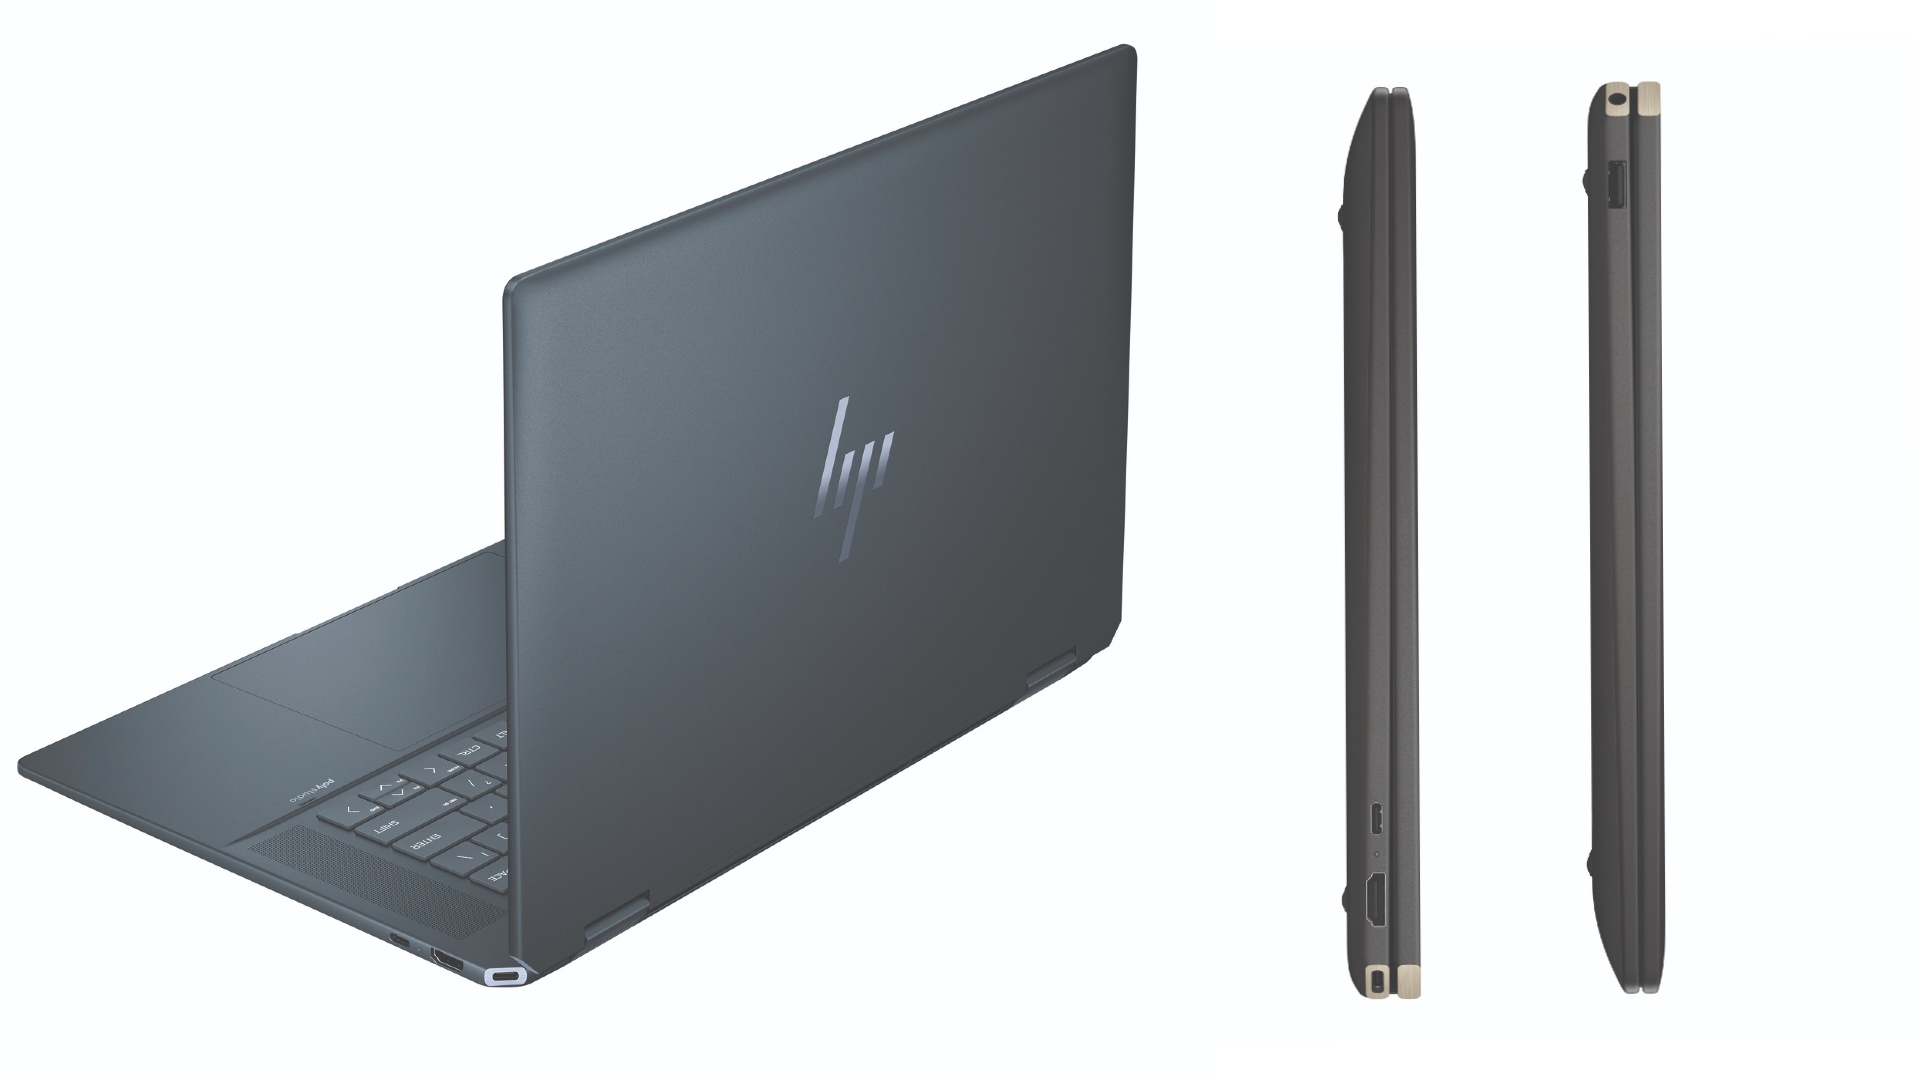 Image of the new HP Spectre x360.